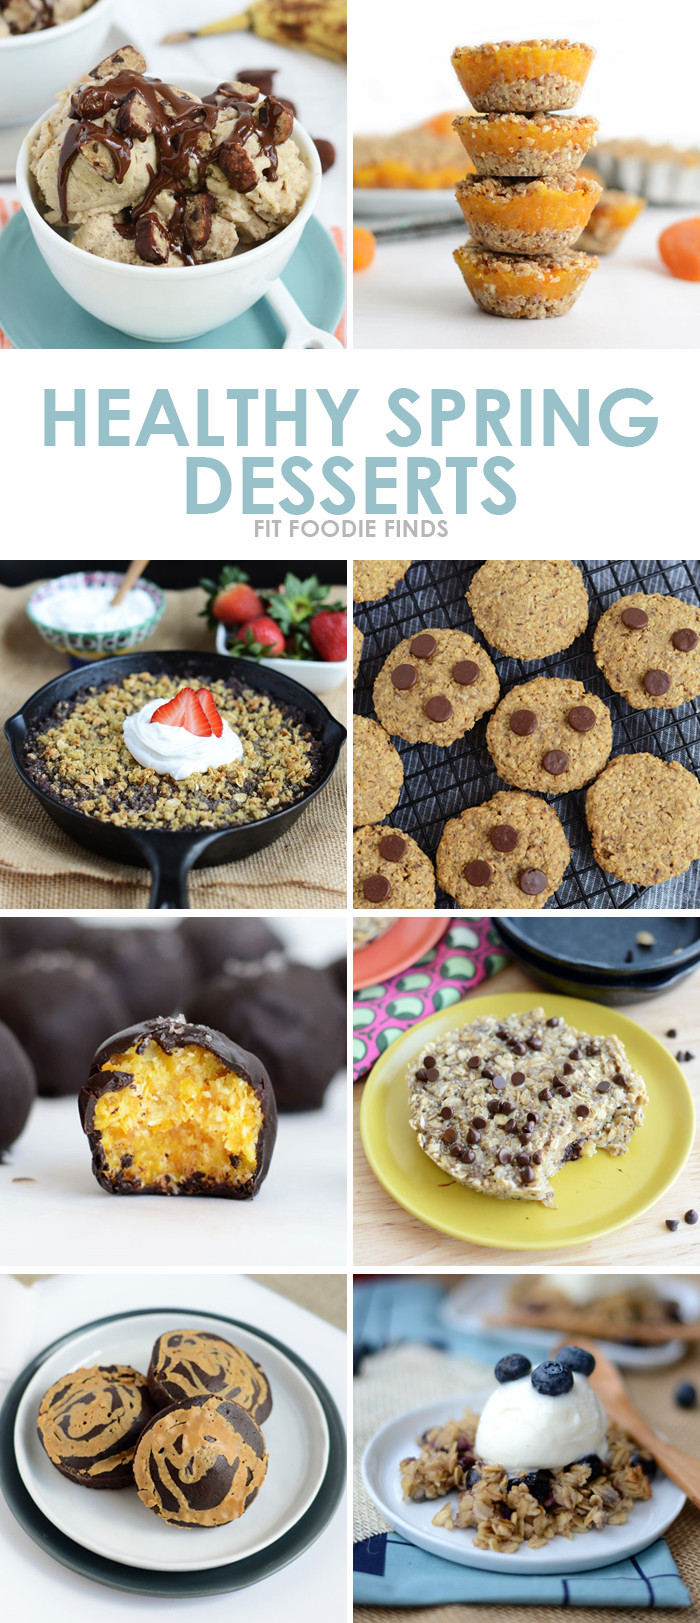 Healthy Spring Desserts
 32 Healthy Spring Recipes Reader Survey and Giveaway